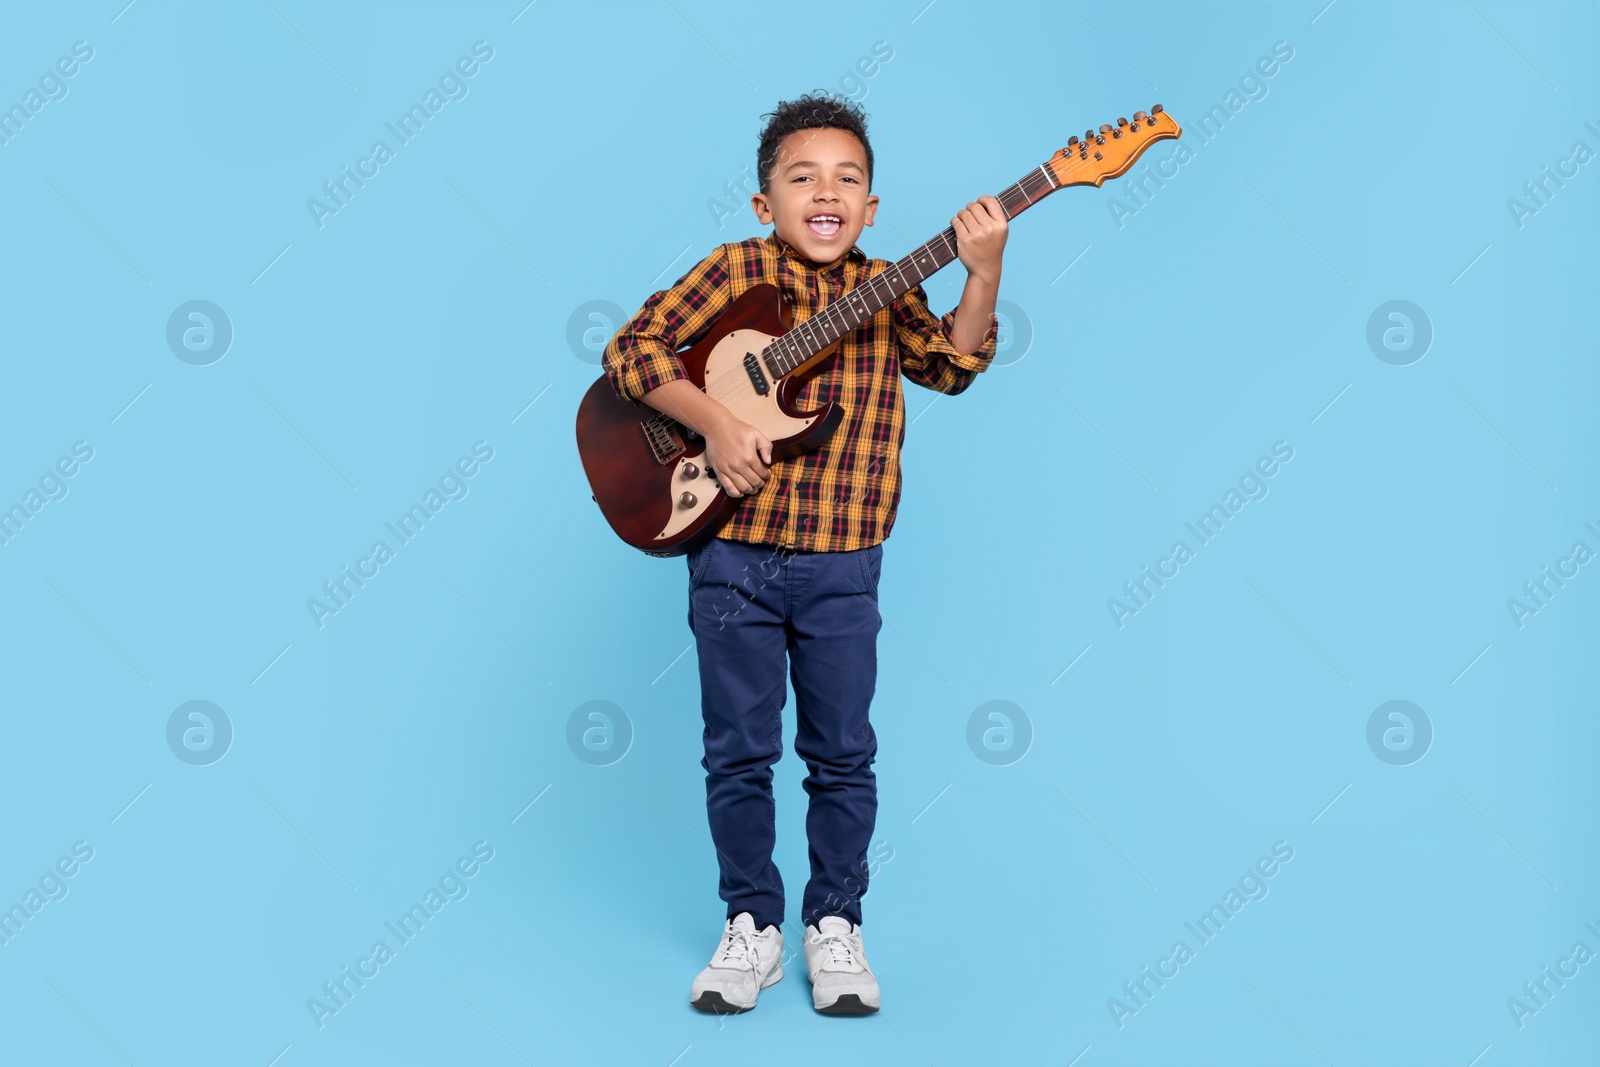 Photo of Cute African-American boy with electric guitar on turquoise background